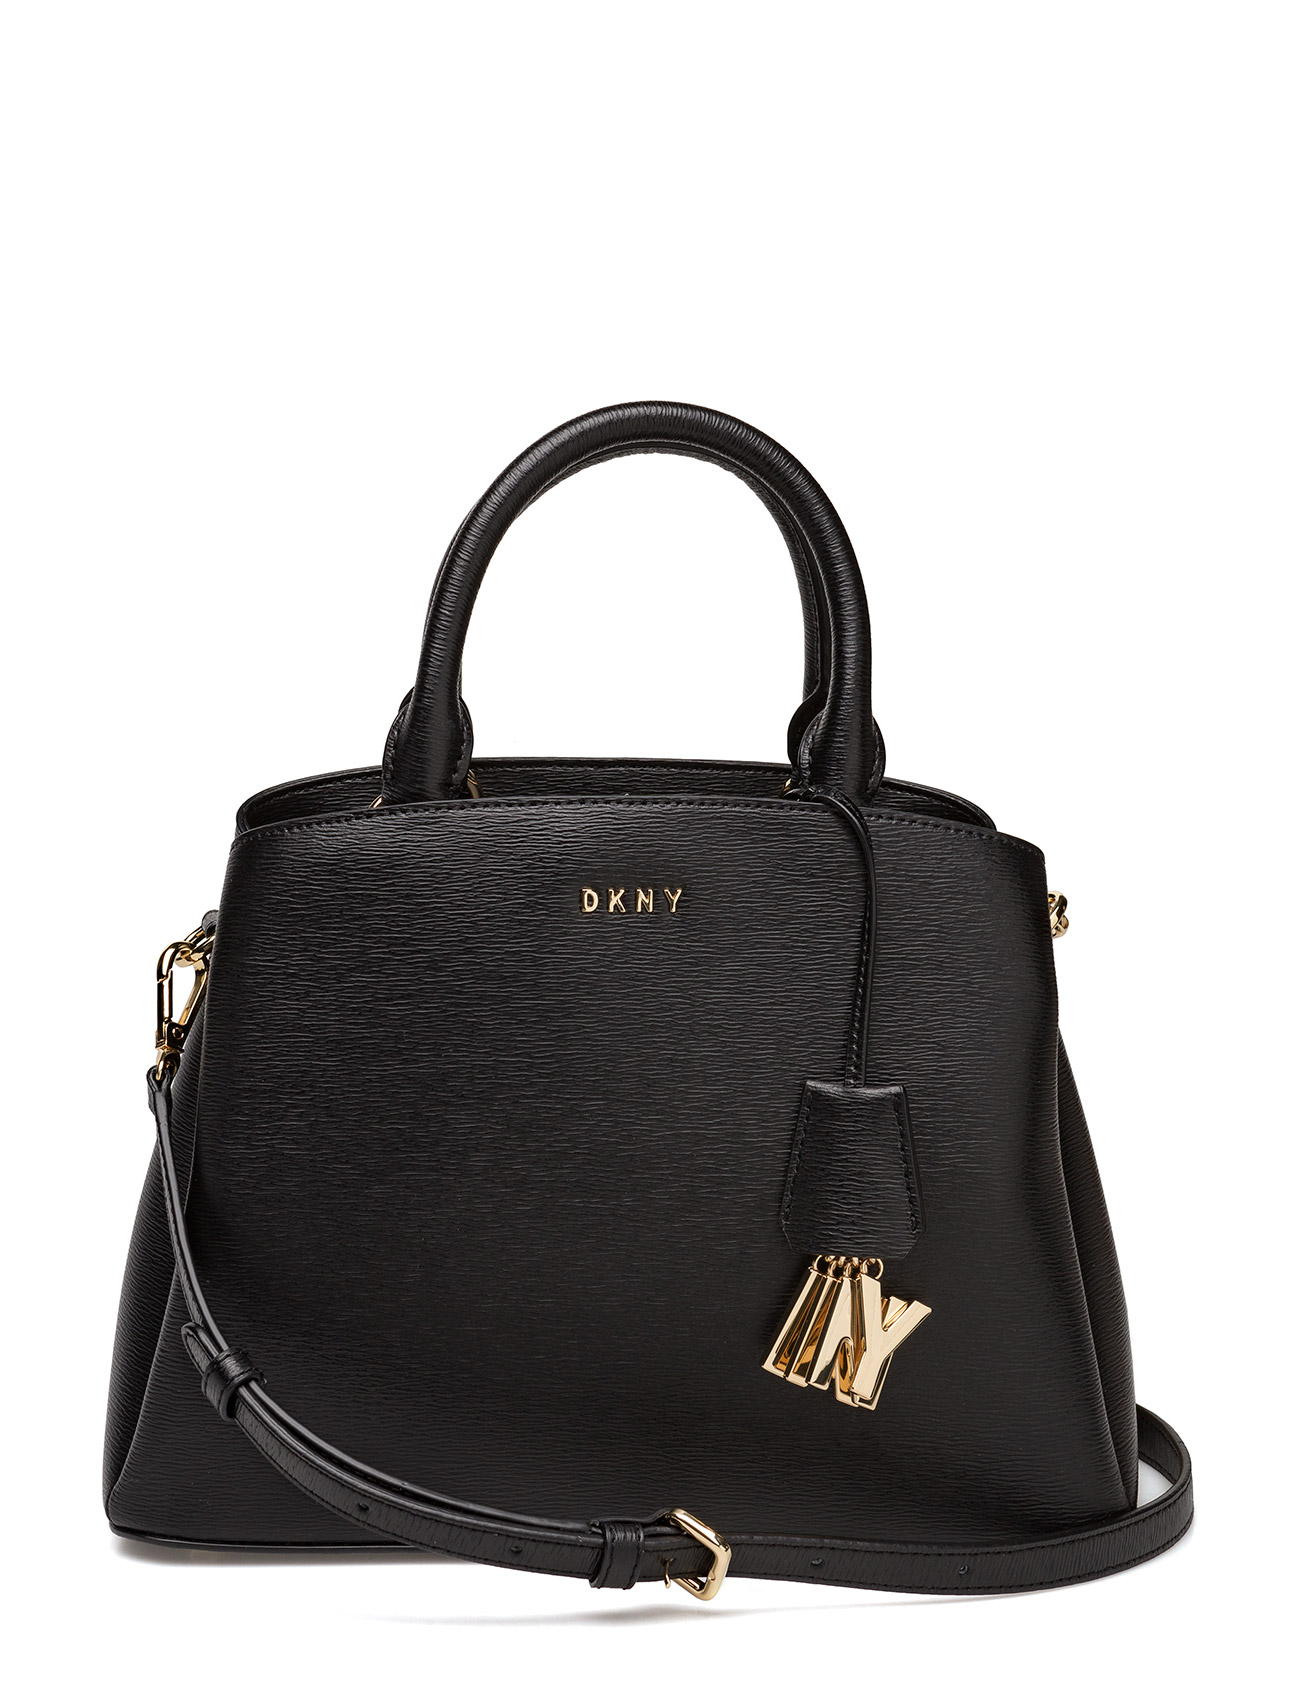 DKNY bags dkny bags paige- md satchel IMPZOYJ